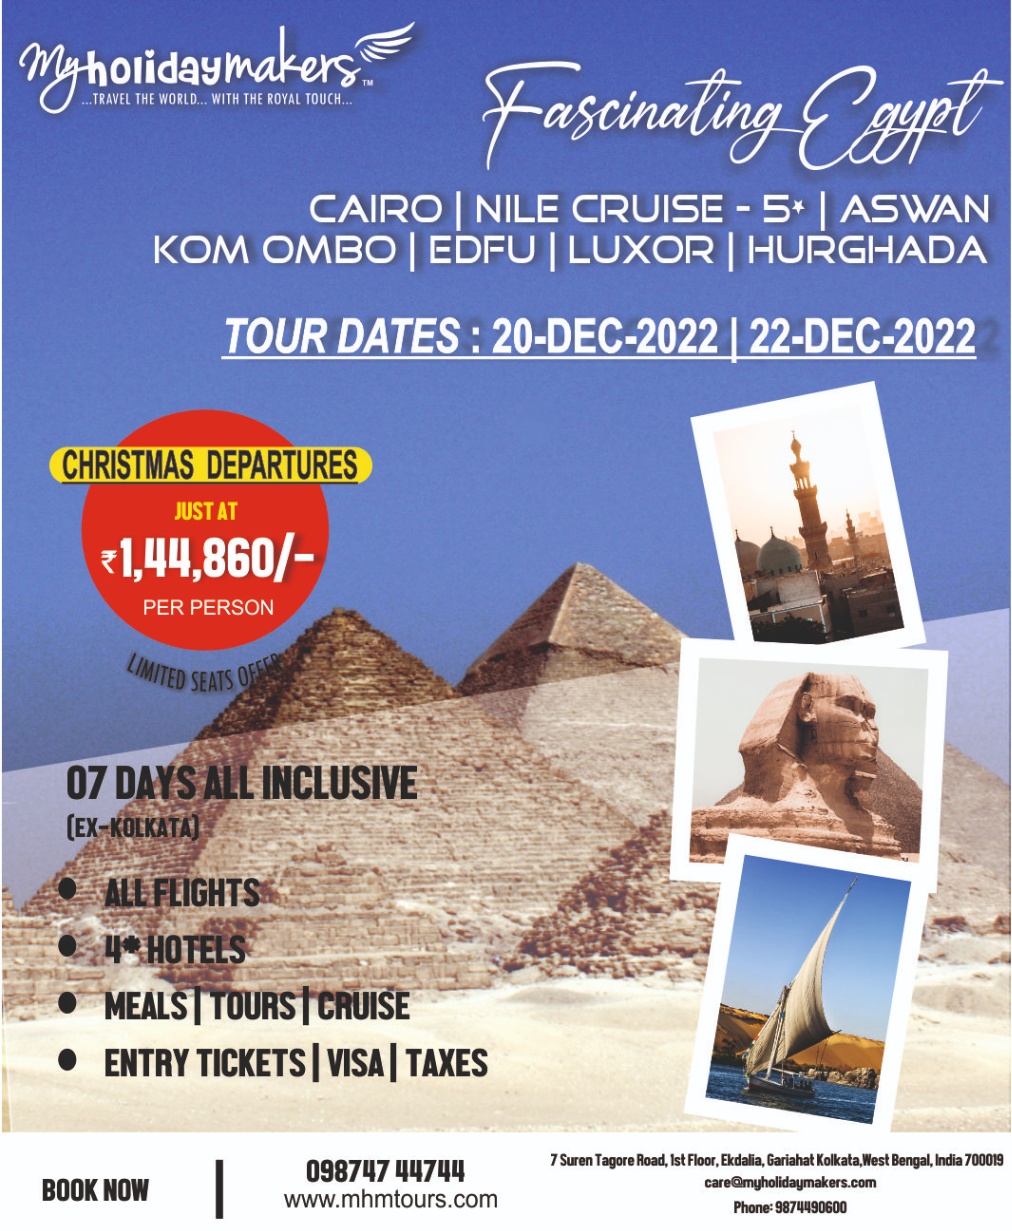 Flight Tickets, Honeymoon Packages, International Tour; Exp: More than 10 year